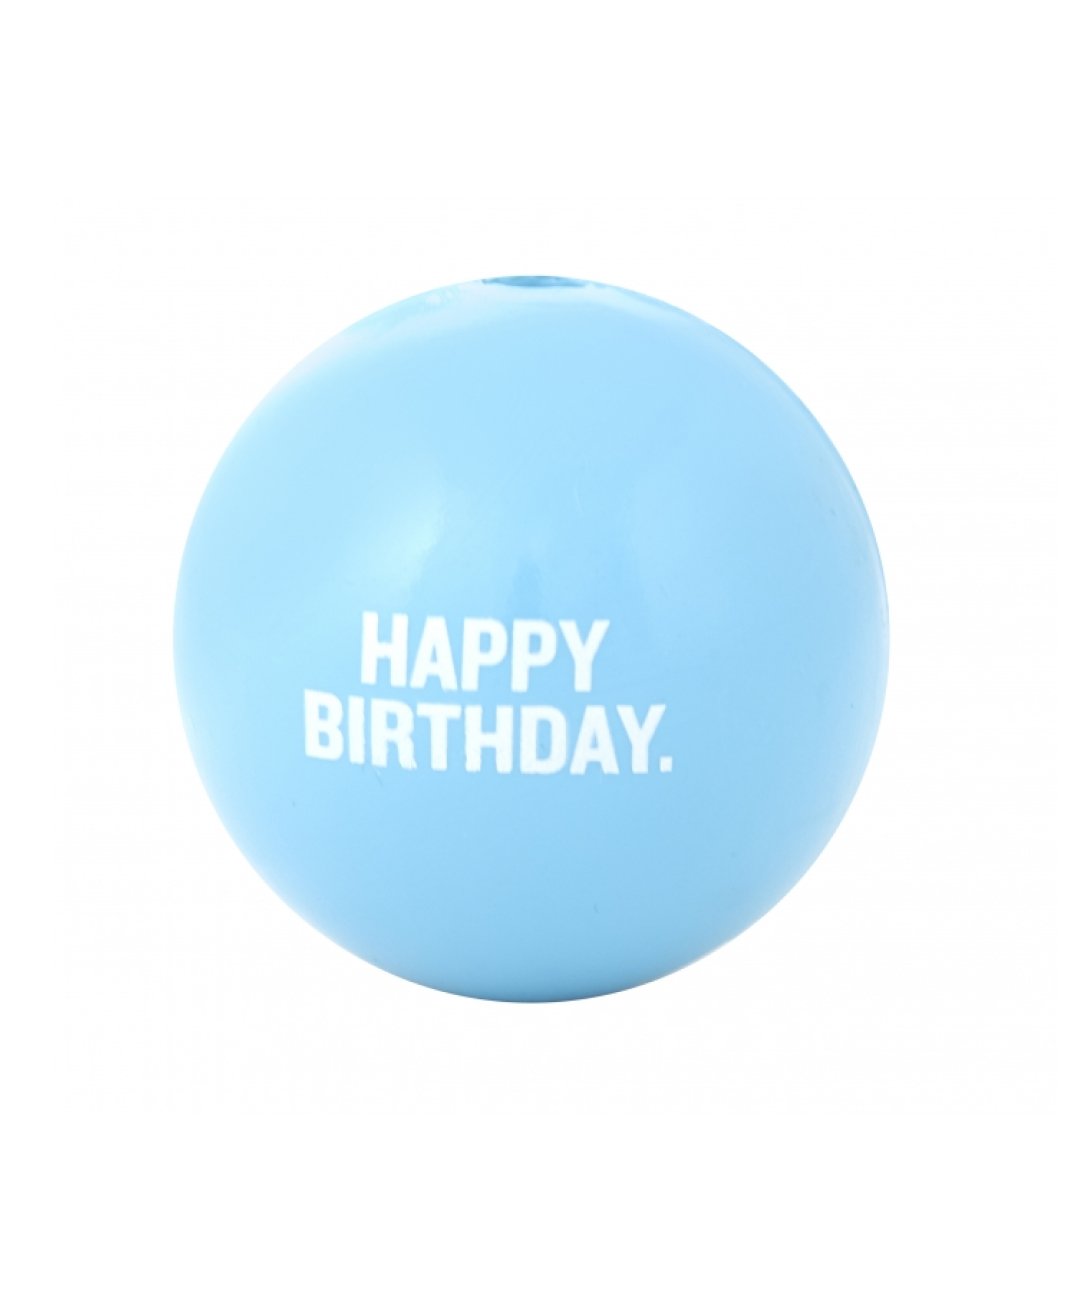 Orbee-Tuff ‘Happy Birthday’ Treat Dispensing Dog Toy by Outward Hound Toys Rover 